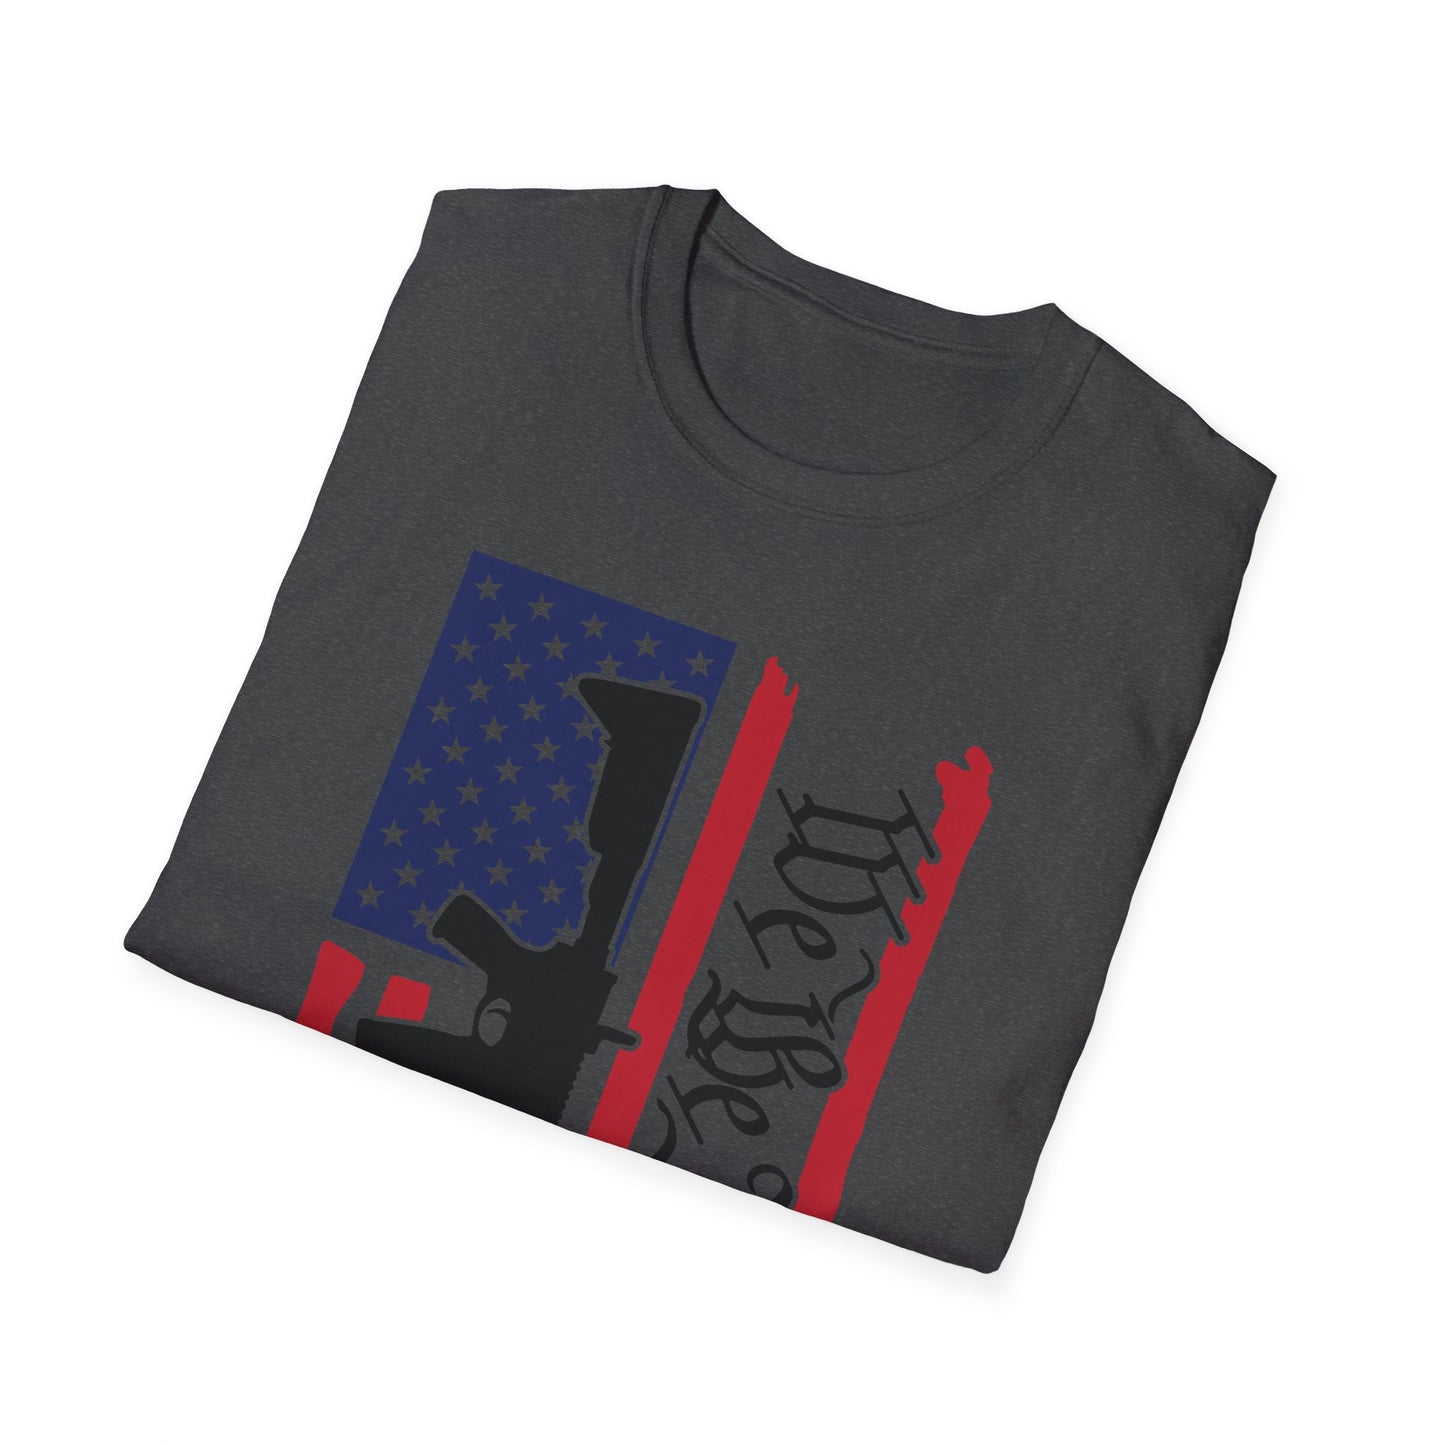 Distressed Vertical American Flag Color - We The People - Unisex Softstyle T-Shirt